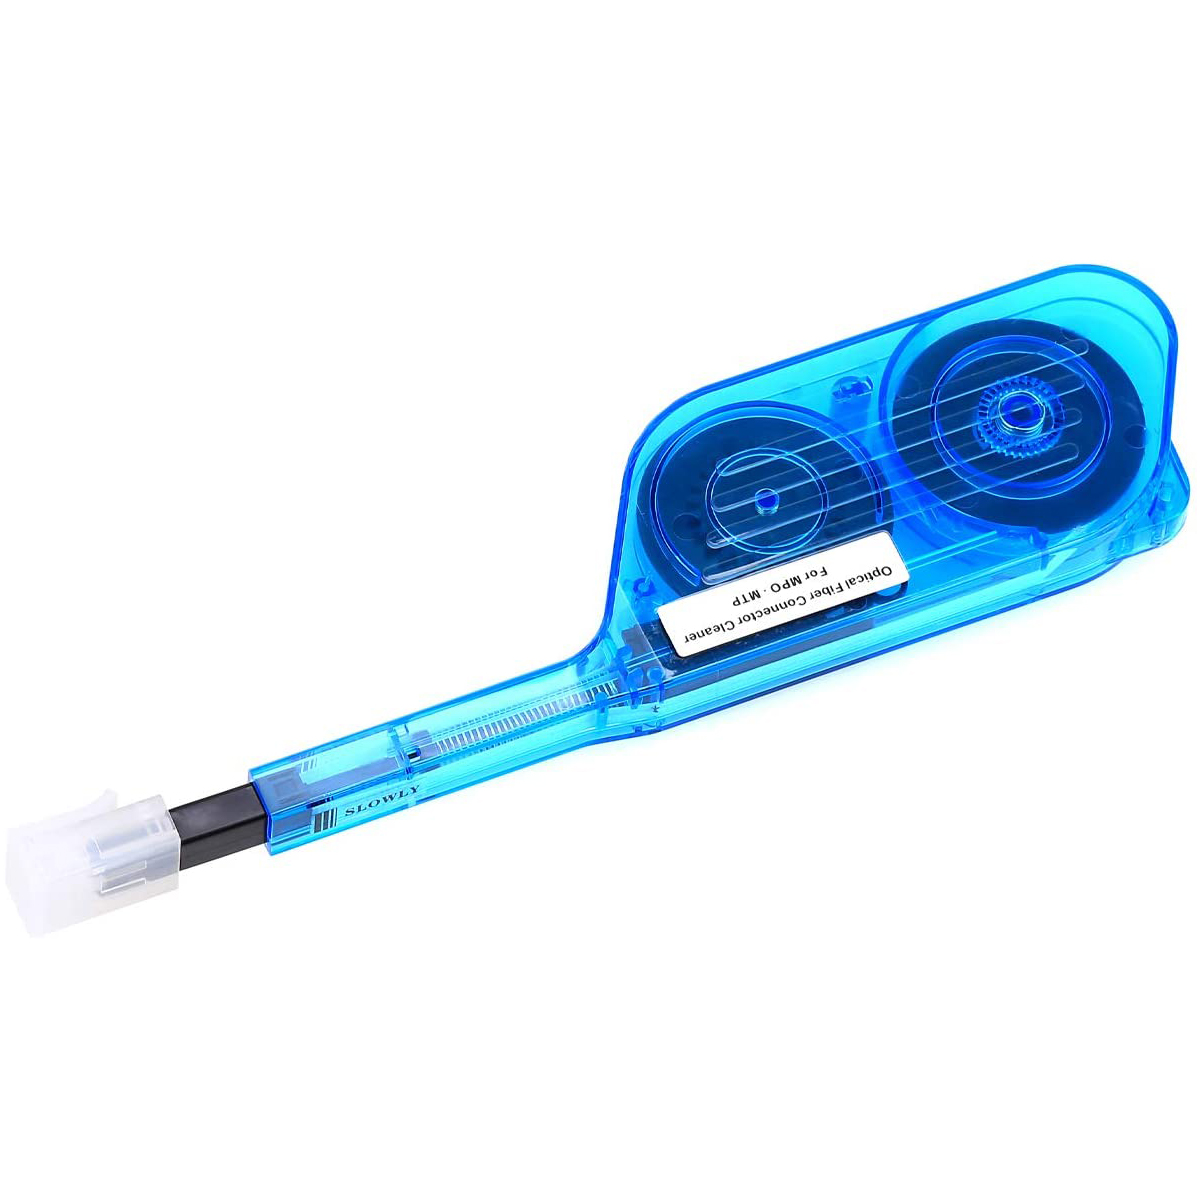 One Click Fiber Optic Cleaner for MPO and MTP Connectors or Adapters 500+ Cleaning